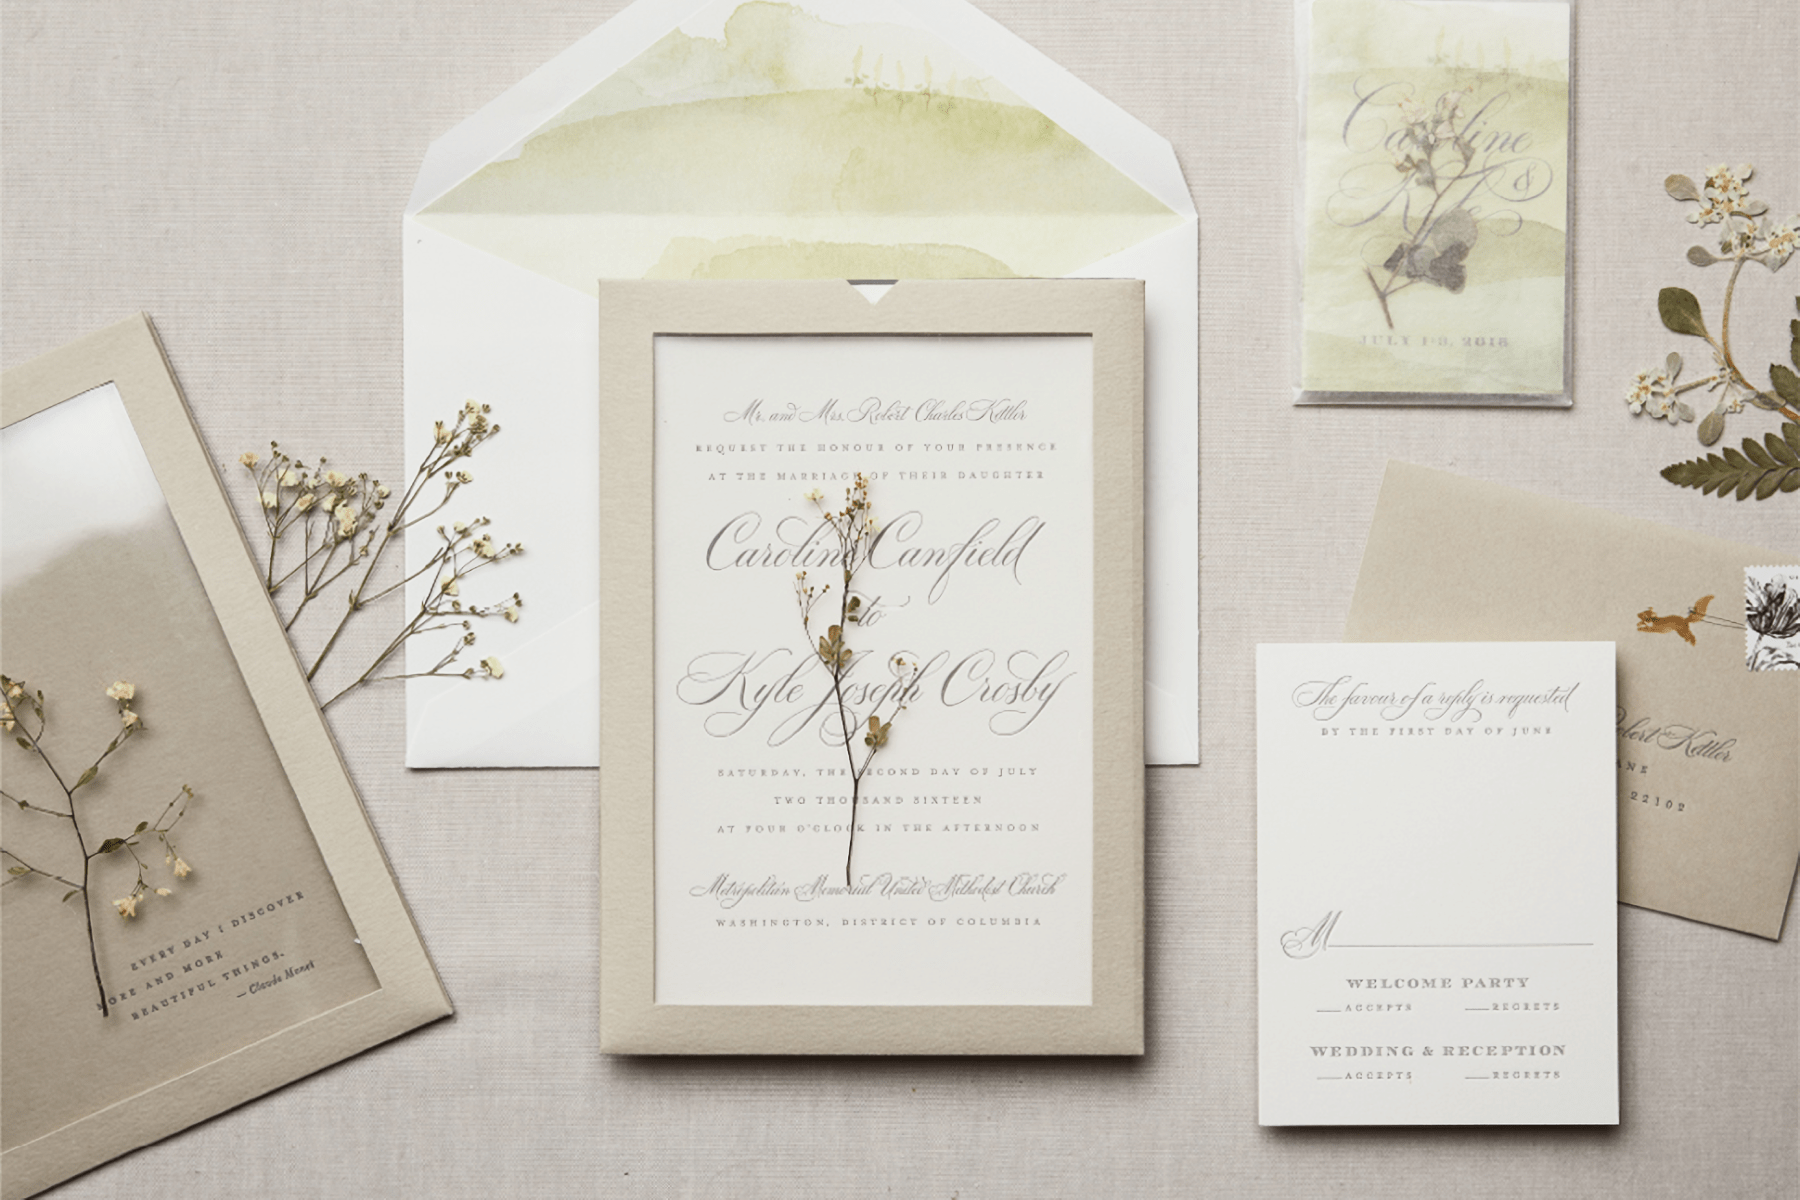 Various elements of a wedding invitation suite with a cream colored text-only invitation, a clear overlay, RSVP card, and envelope and little dried flower stems that will presumably be inserted into the envelopes for mailing.